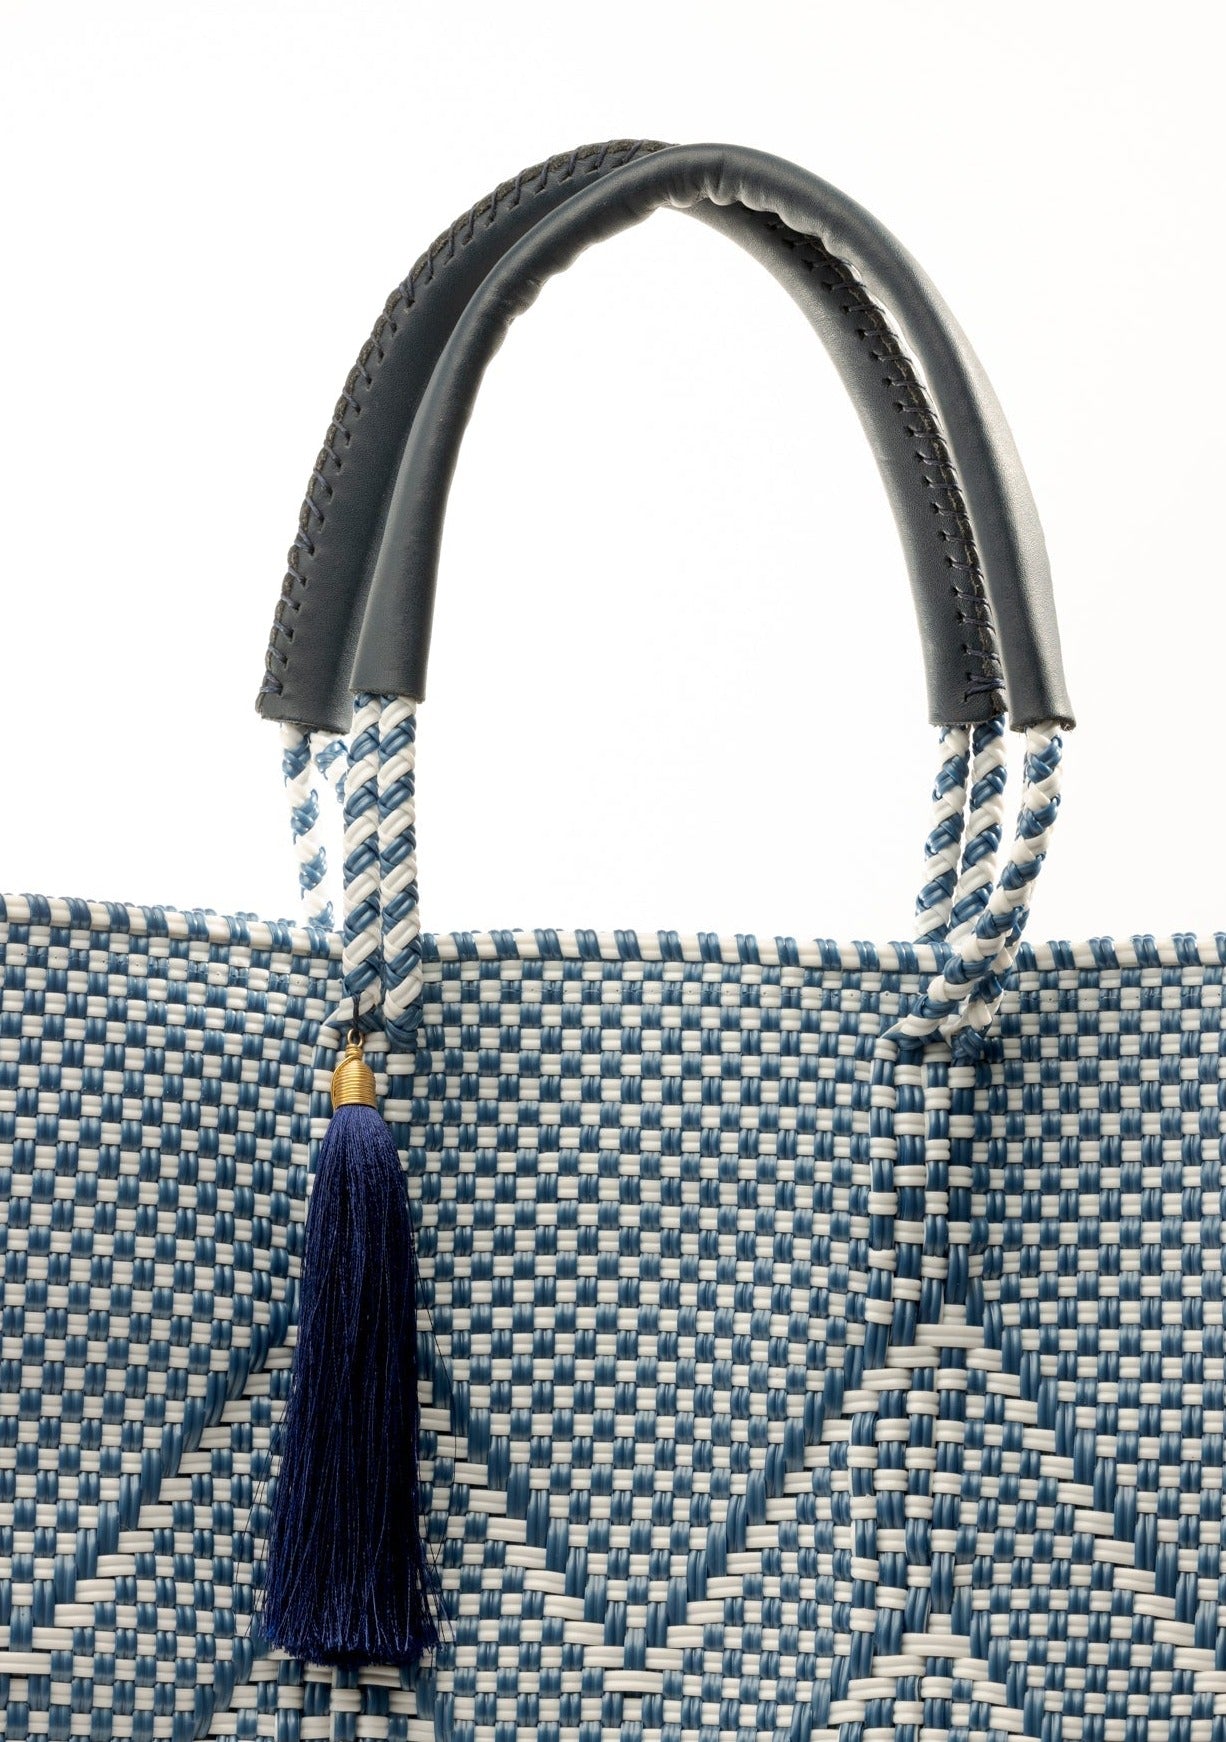 Closeup of fabric of blue and white chevron woven bucket bag made from recycled plastics featuring navy blue leather handles and tassel detail